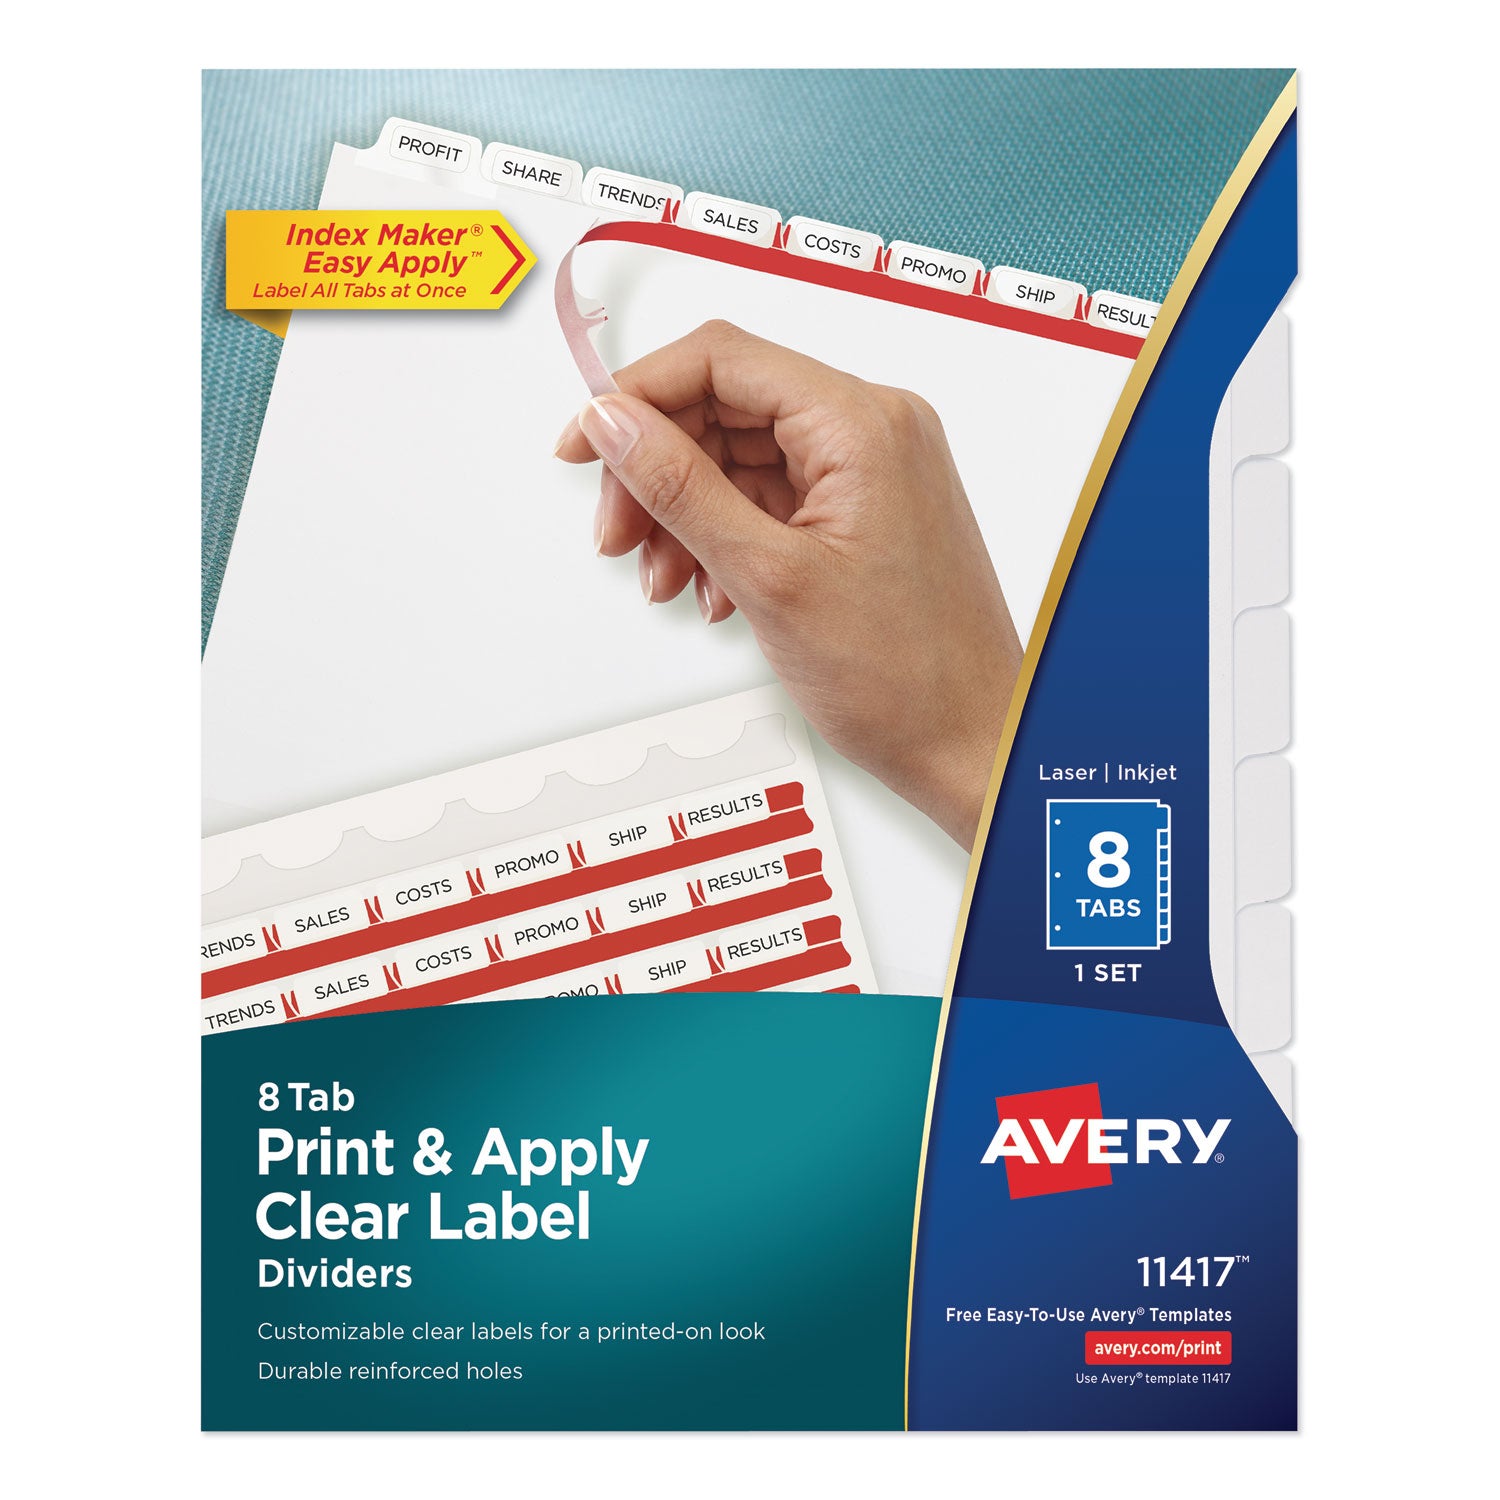 Print and Apply Index Maker Clear Label Dividers, 8-Tab, 11 x 8.5, White, 1 Set - 